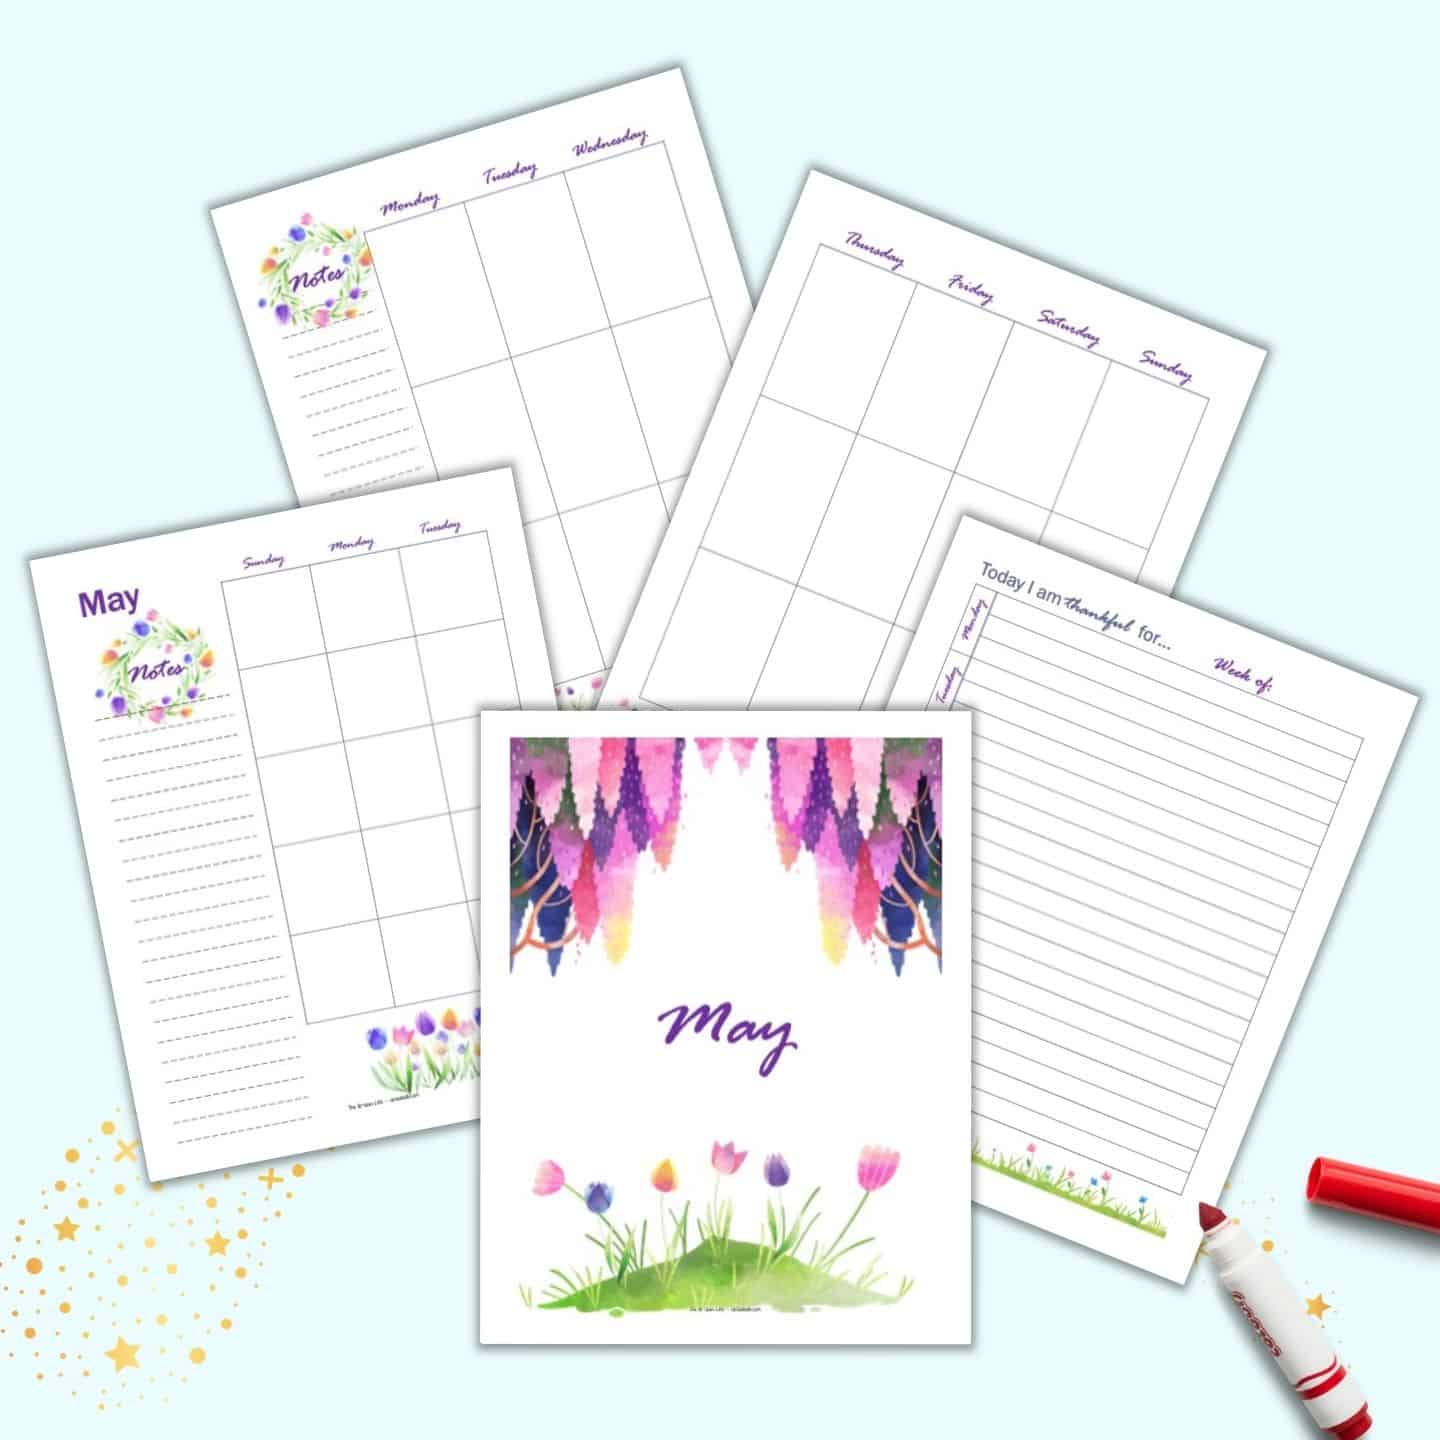 Productivity Planner Insert Free Weekly Planner 2021 A4 & JPG